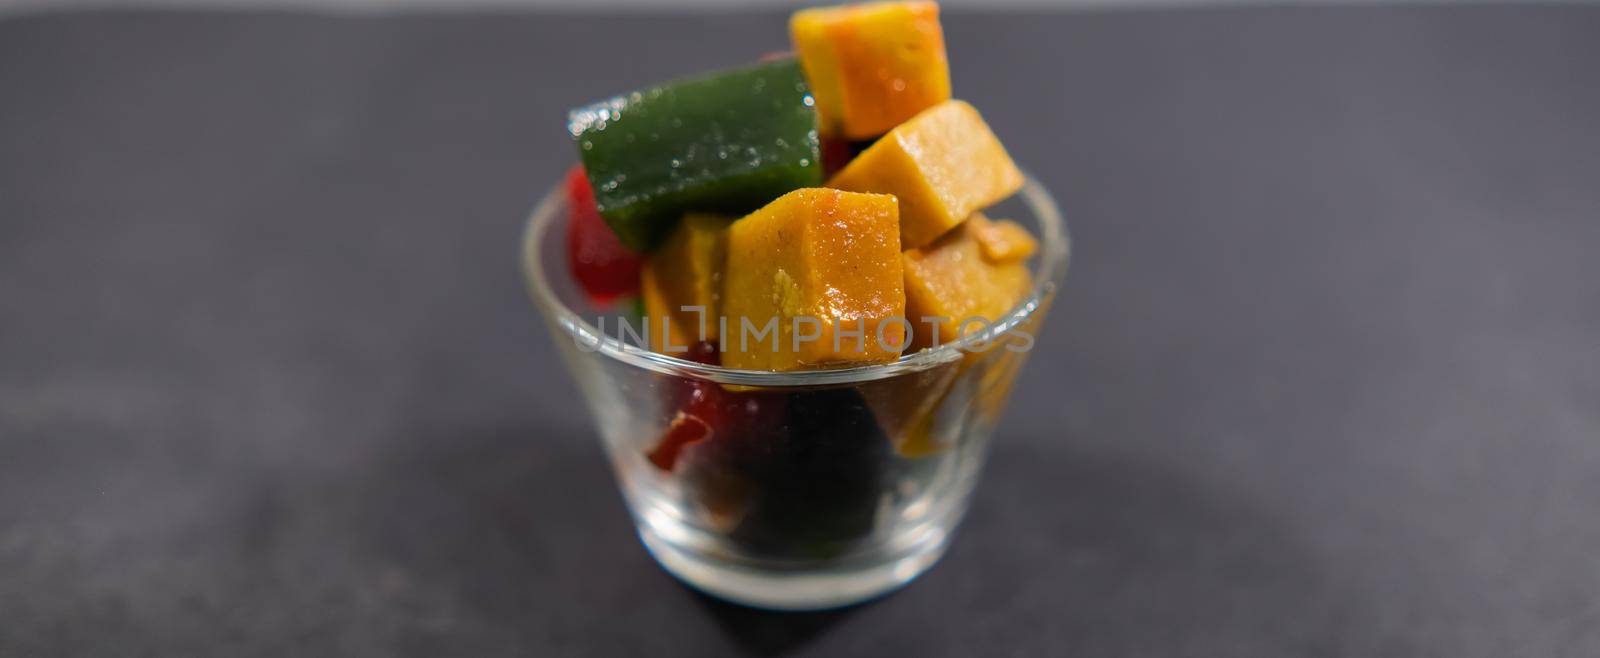 Wide view of glass of red, yellow, and green fruit paste slices on black surface. Close-up of authentic natural Mexican candy cubes in glass cup. Tasty traditional snacks